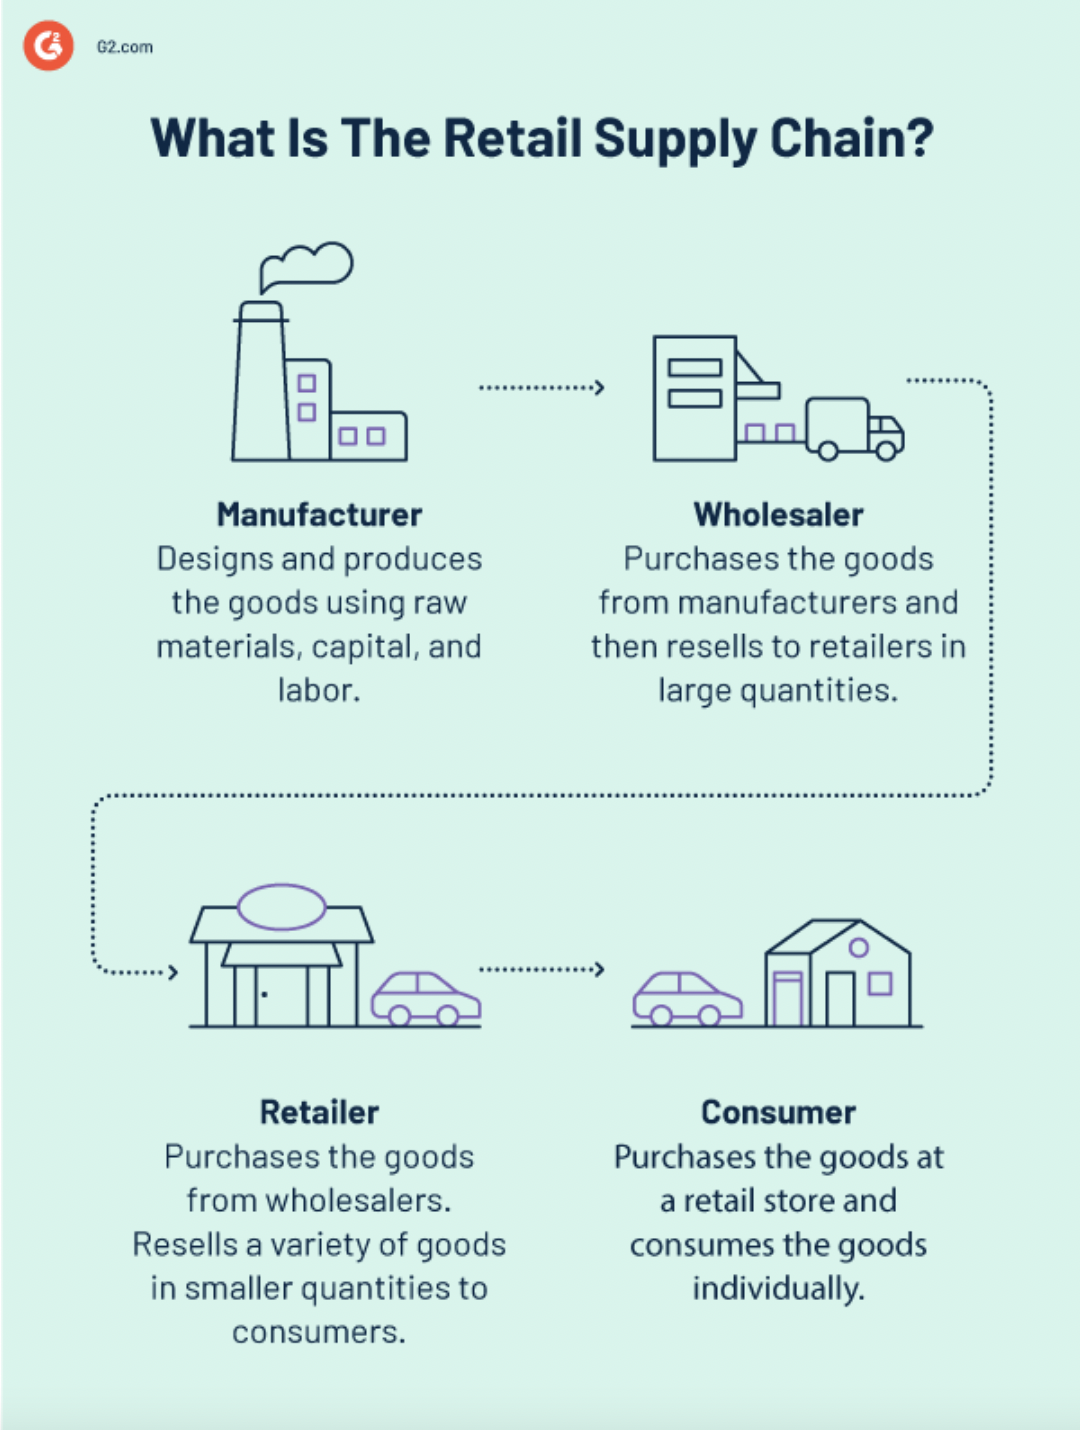 retail supply chain infographic